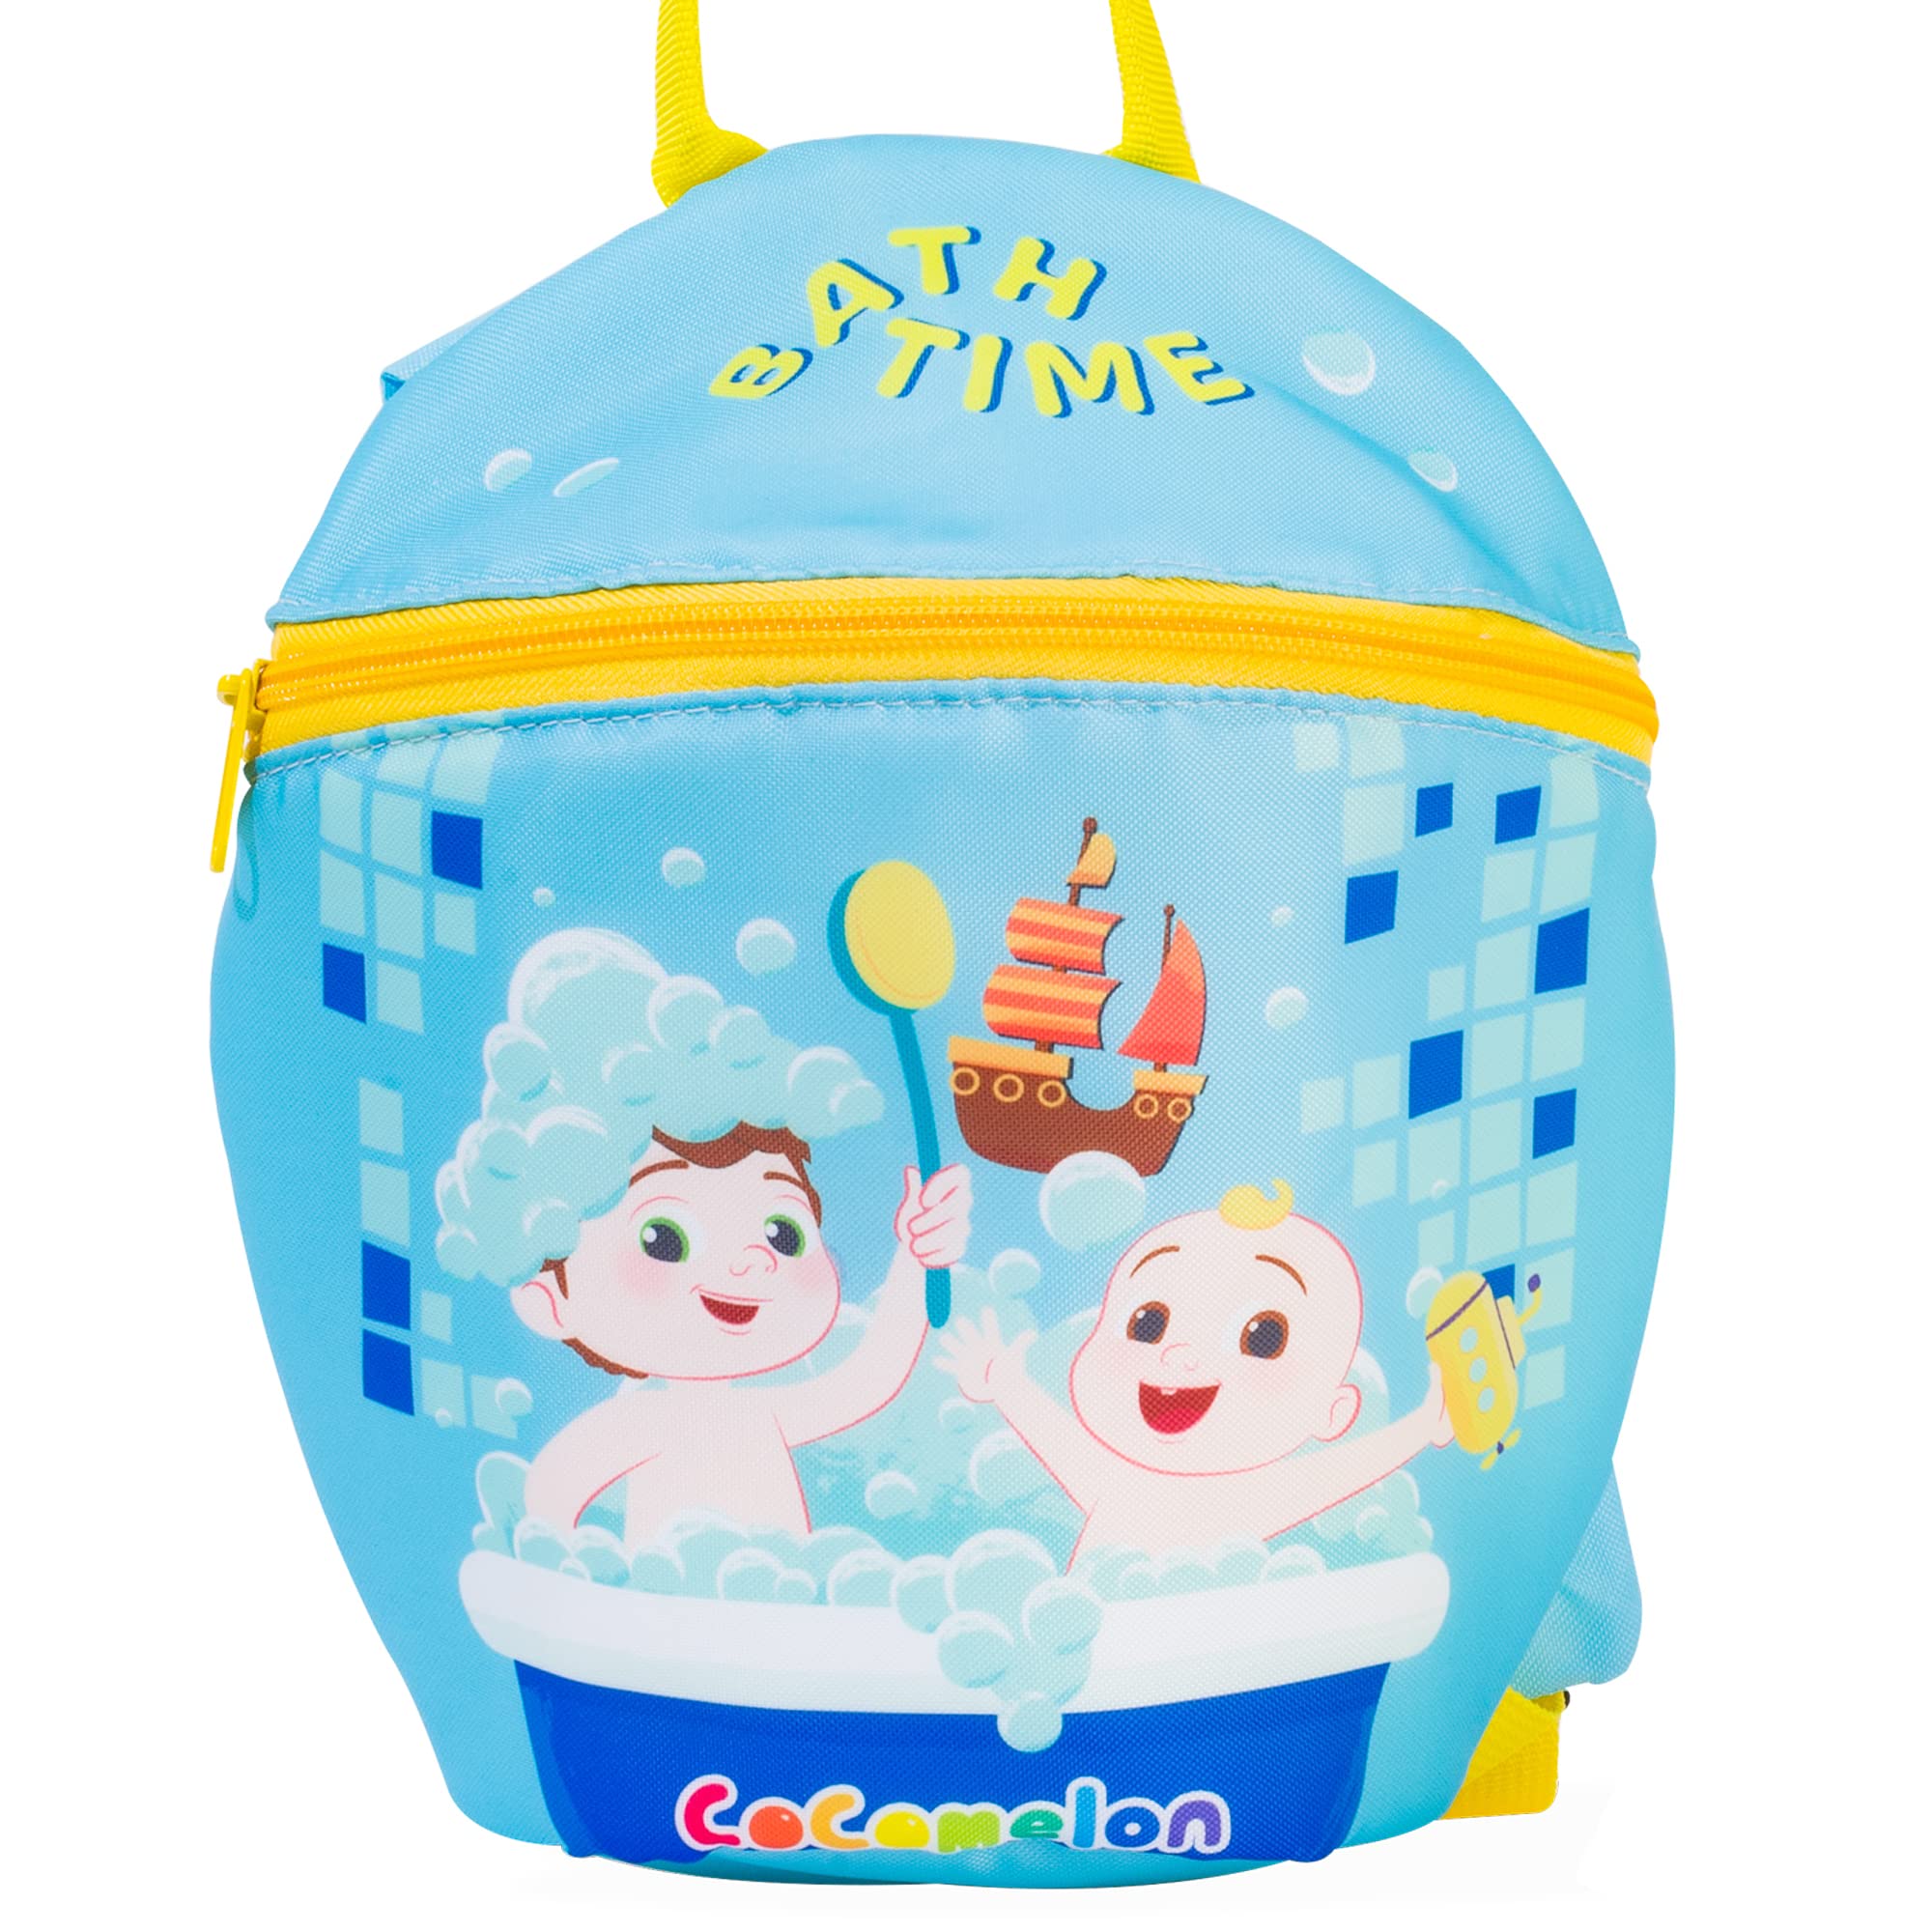 Cocomelon Toddler Backpack with reins | Baby Reins Backpack | Unisex Nursery Toddler Bag with reins for boy Girls | Cocomelon Baby JJ Tomtom Bath Time Design